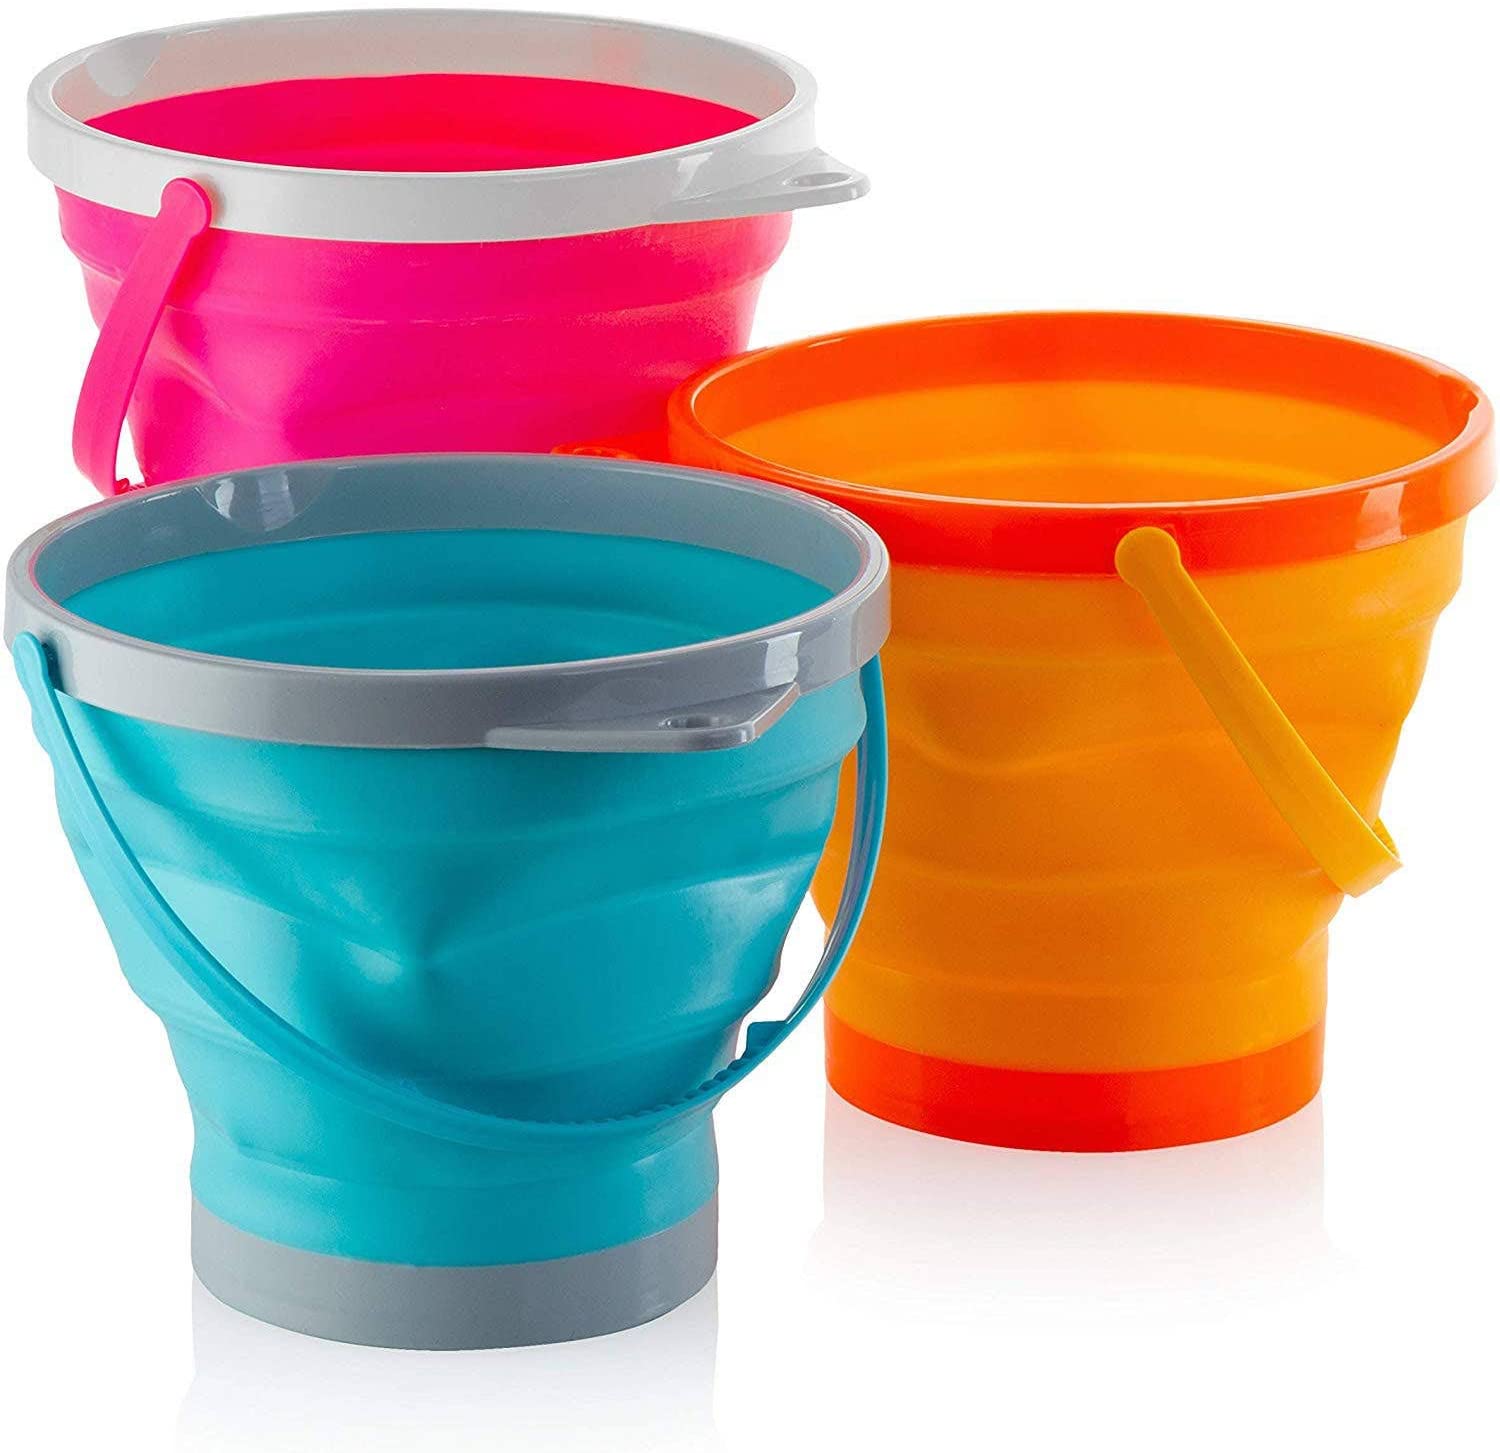 Large Foldable Pail Bucket Collapsible Buckets Multi Purpose For Beach, Camping Gear